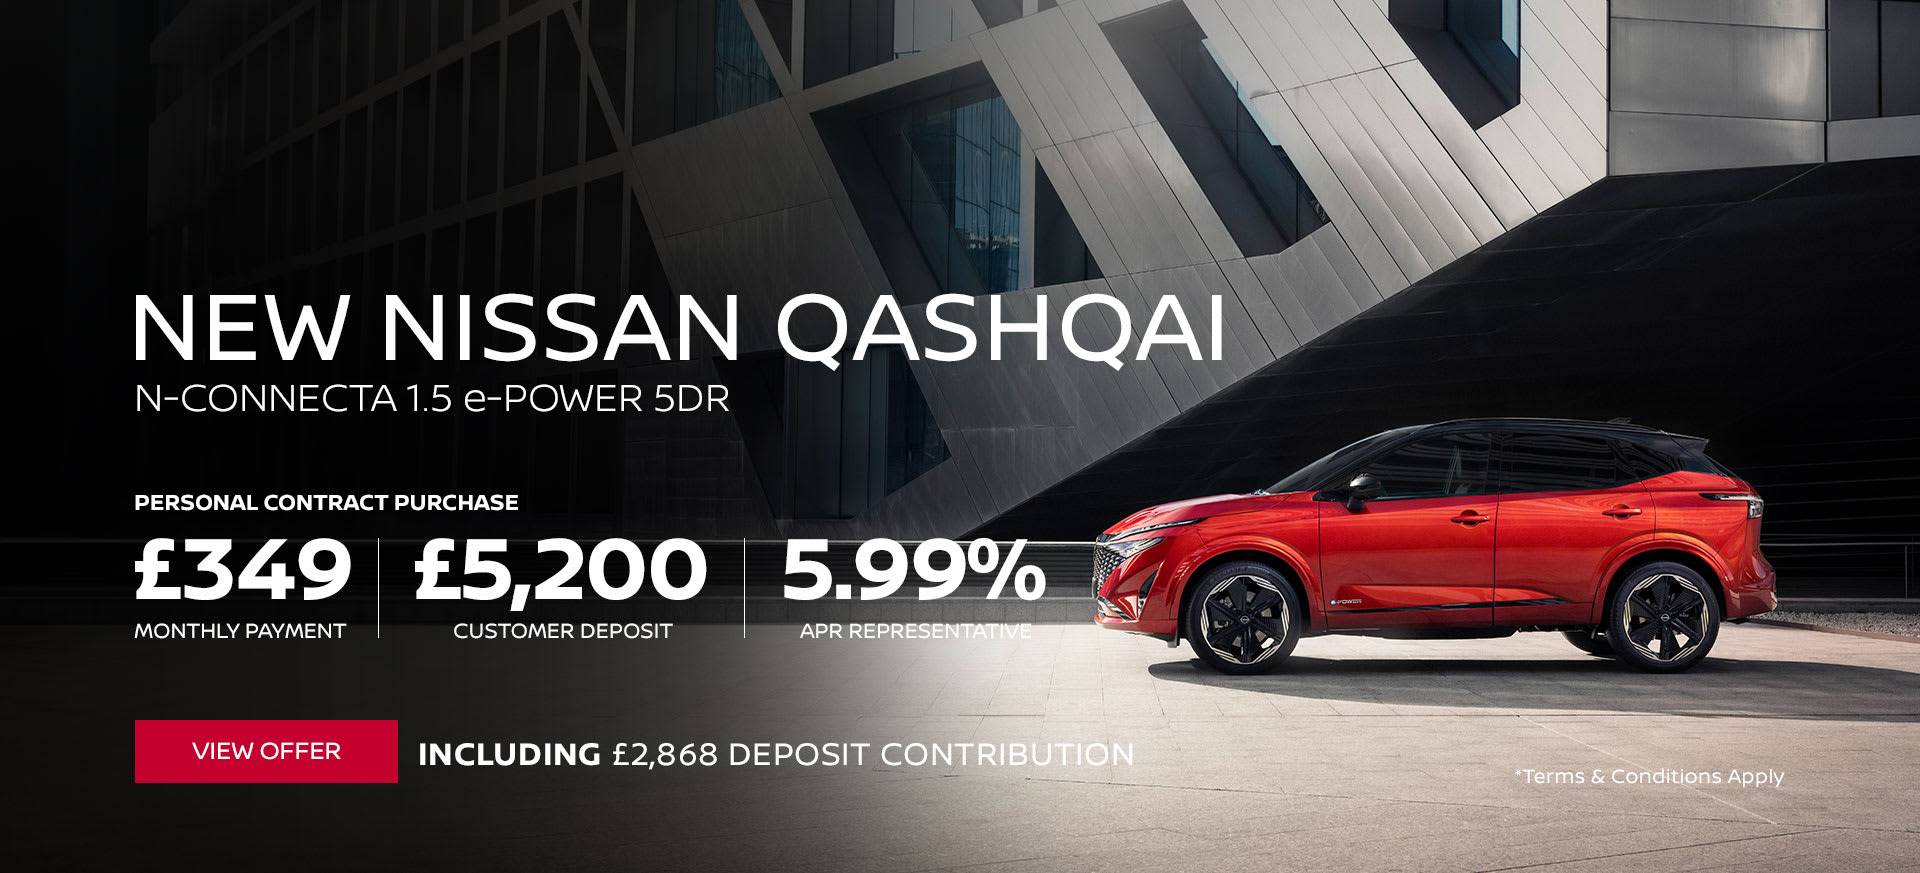 All-New Nissan Qashqai N-Connecta with e-Power